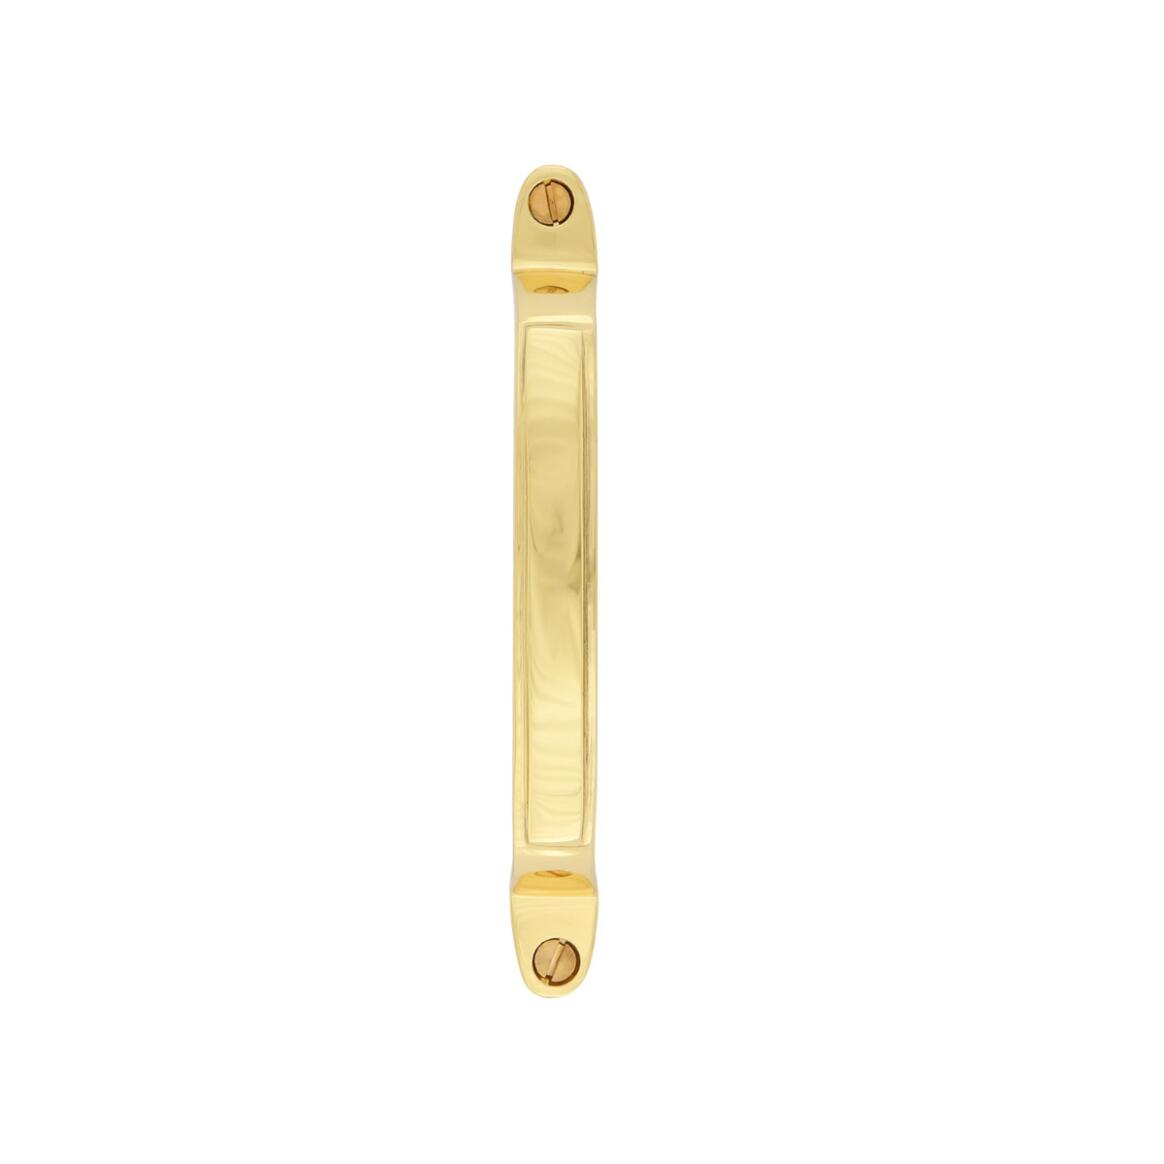 Lismire Brass Pull Handle Large 125mm main product image